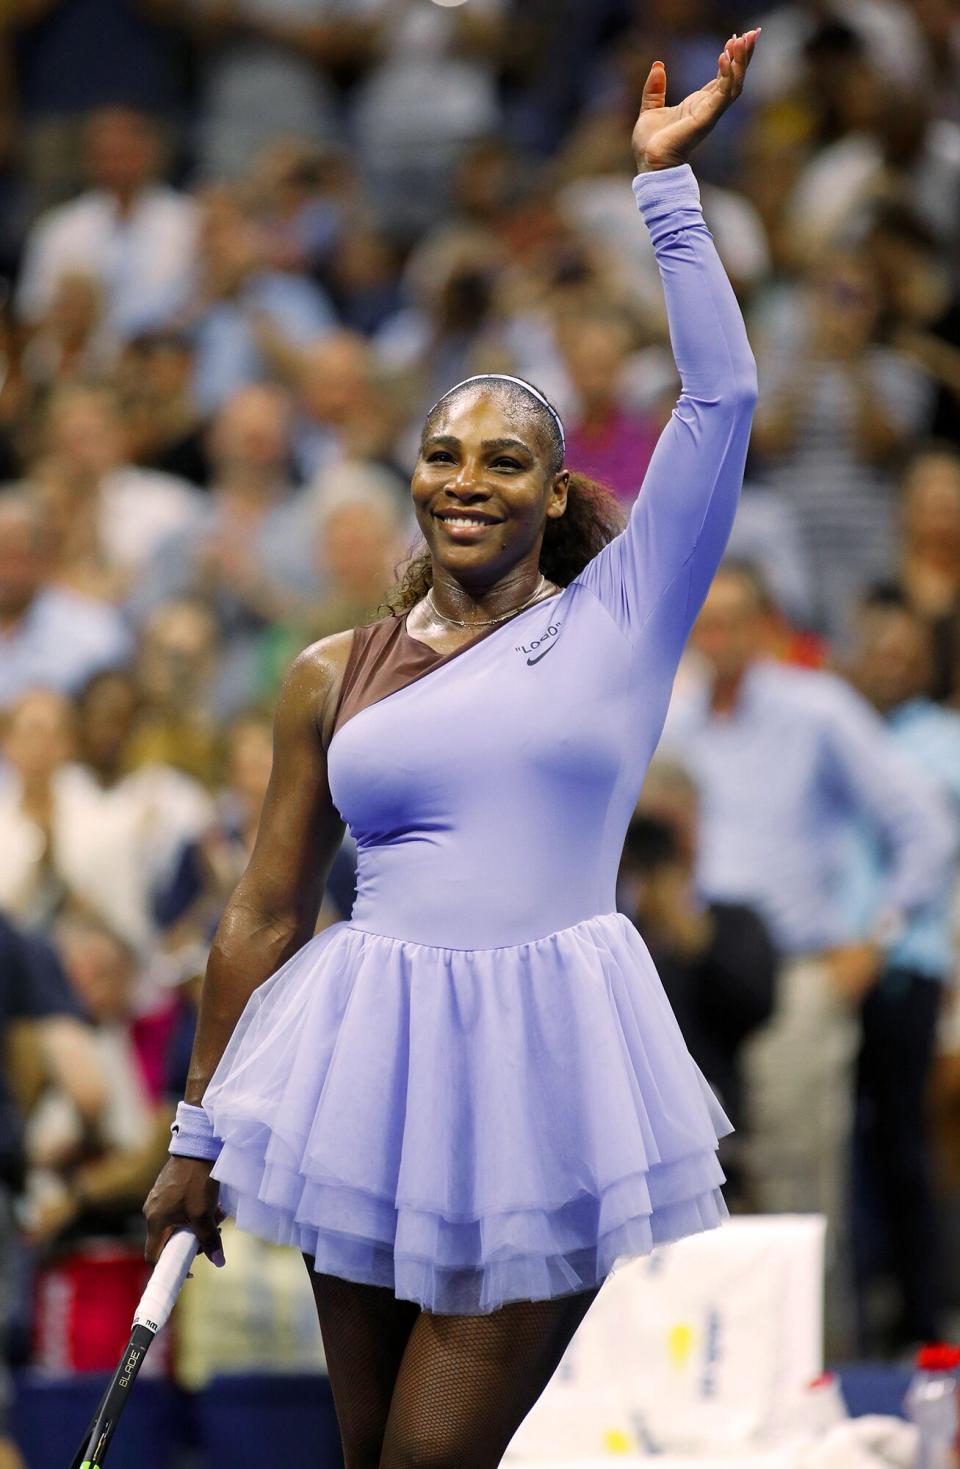 Serena Williams of the US celebrates after defeating Carina Witthoeft (out of frame) of Germany during Day 3 of the 2018 US Open Women's Singles match at the USTA Billie Jean King National Tennis Center in New York on August 29, 2018